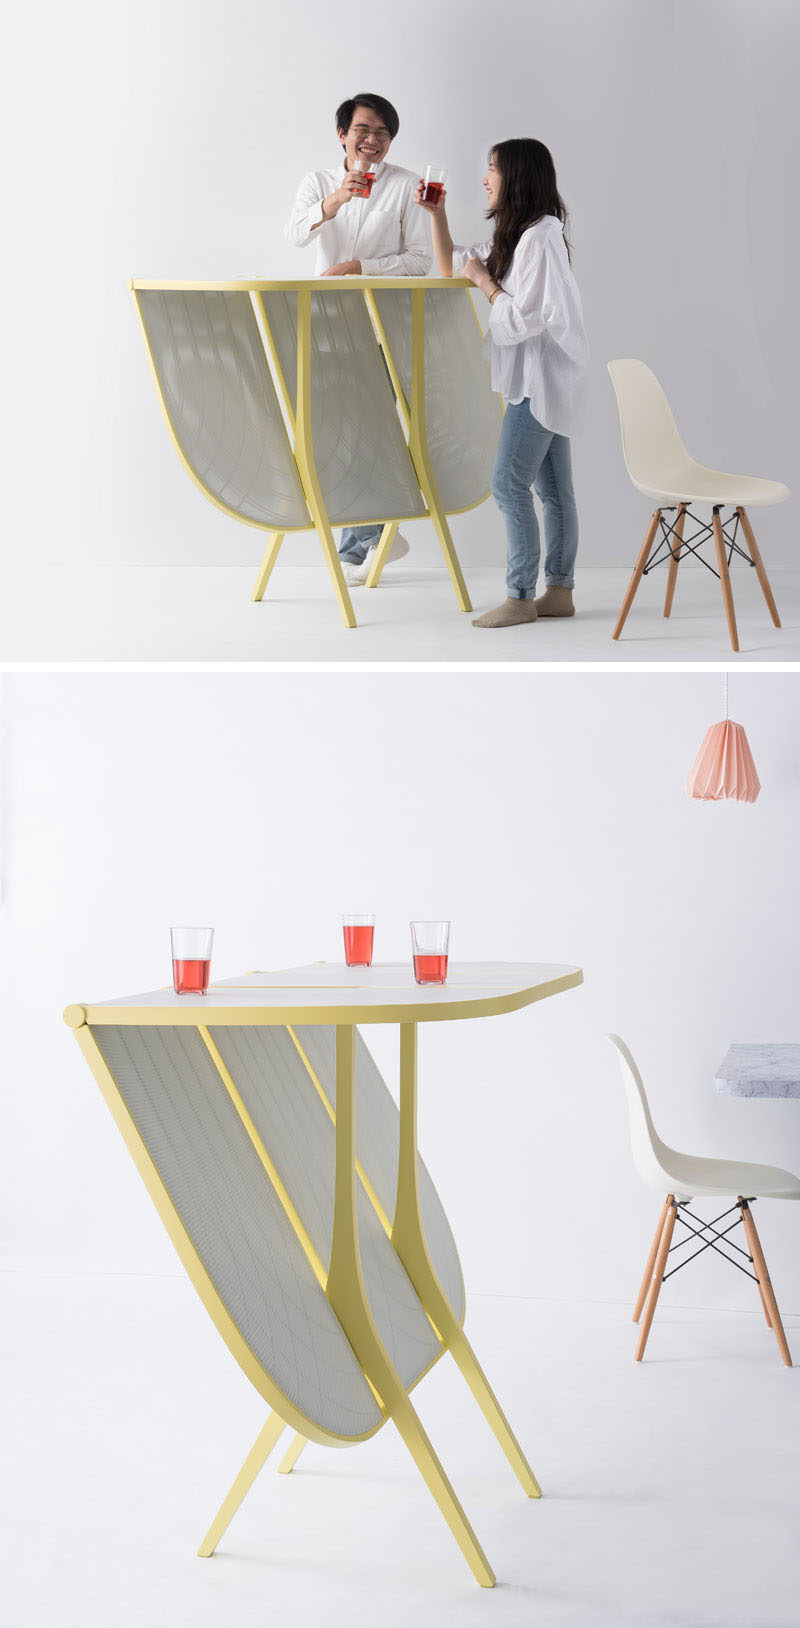 Designer Laurel Hwang has created a modern room partition for an open space, that when needed, can be transformed into a bar table. #ModernFurniture #RoomPartition #RoomDivider #BarTable #Design